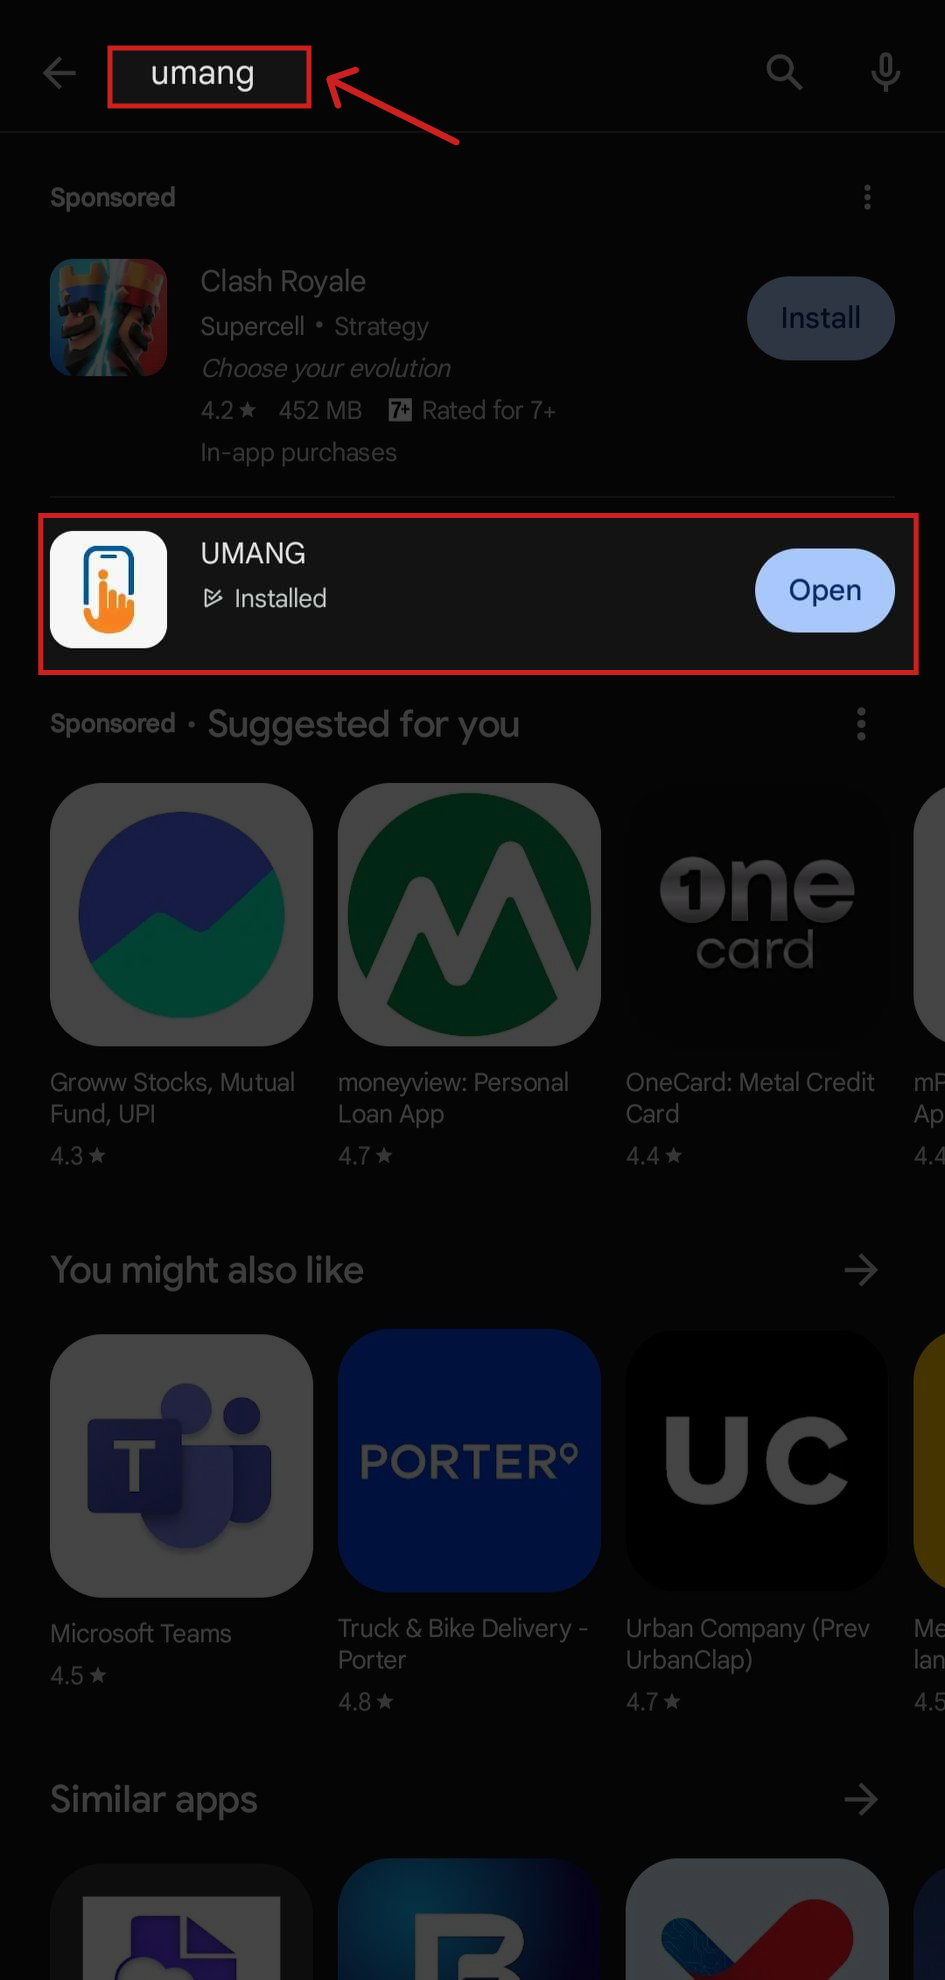 Step1 - Download & install the UMANG app